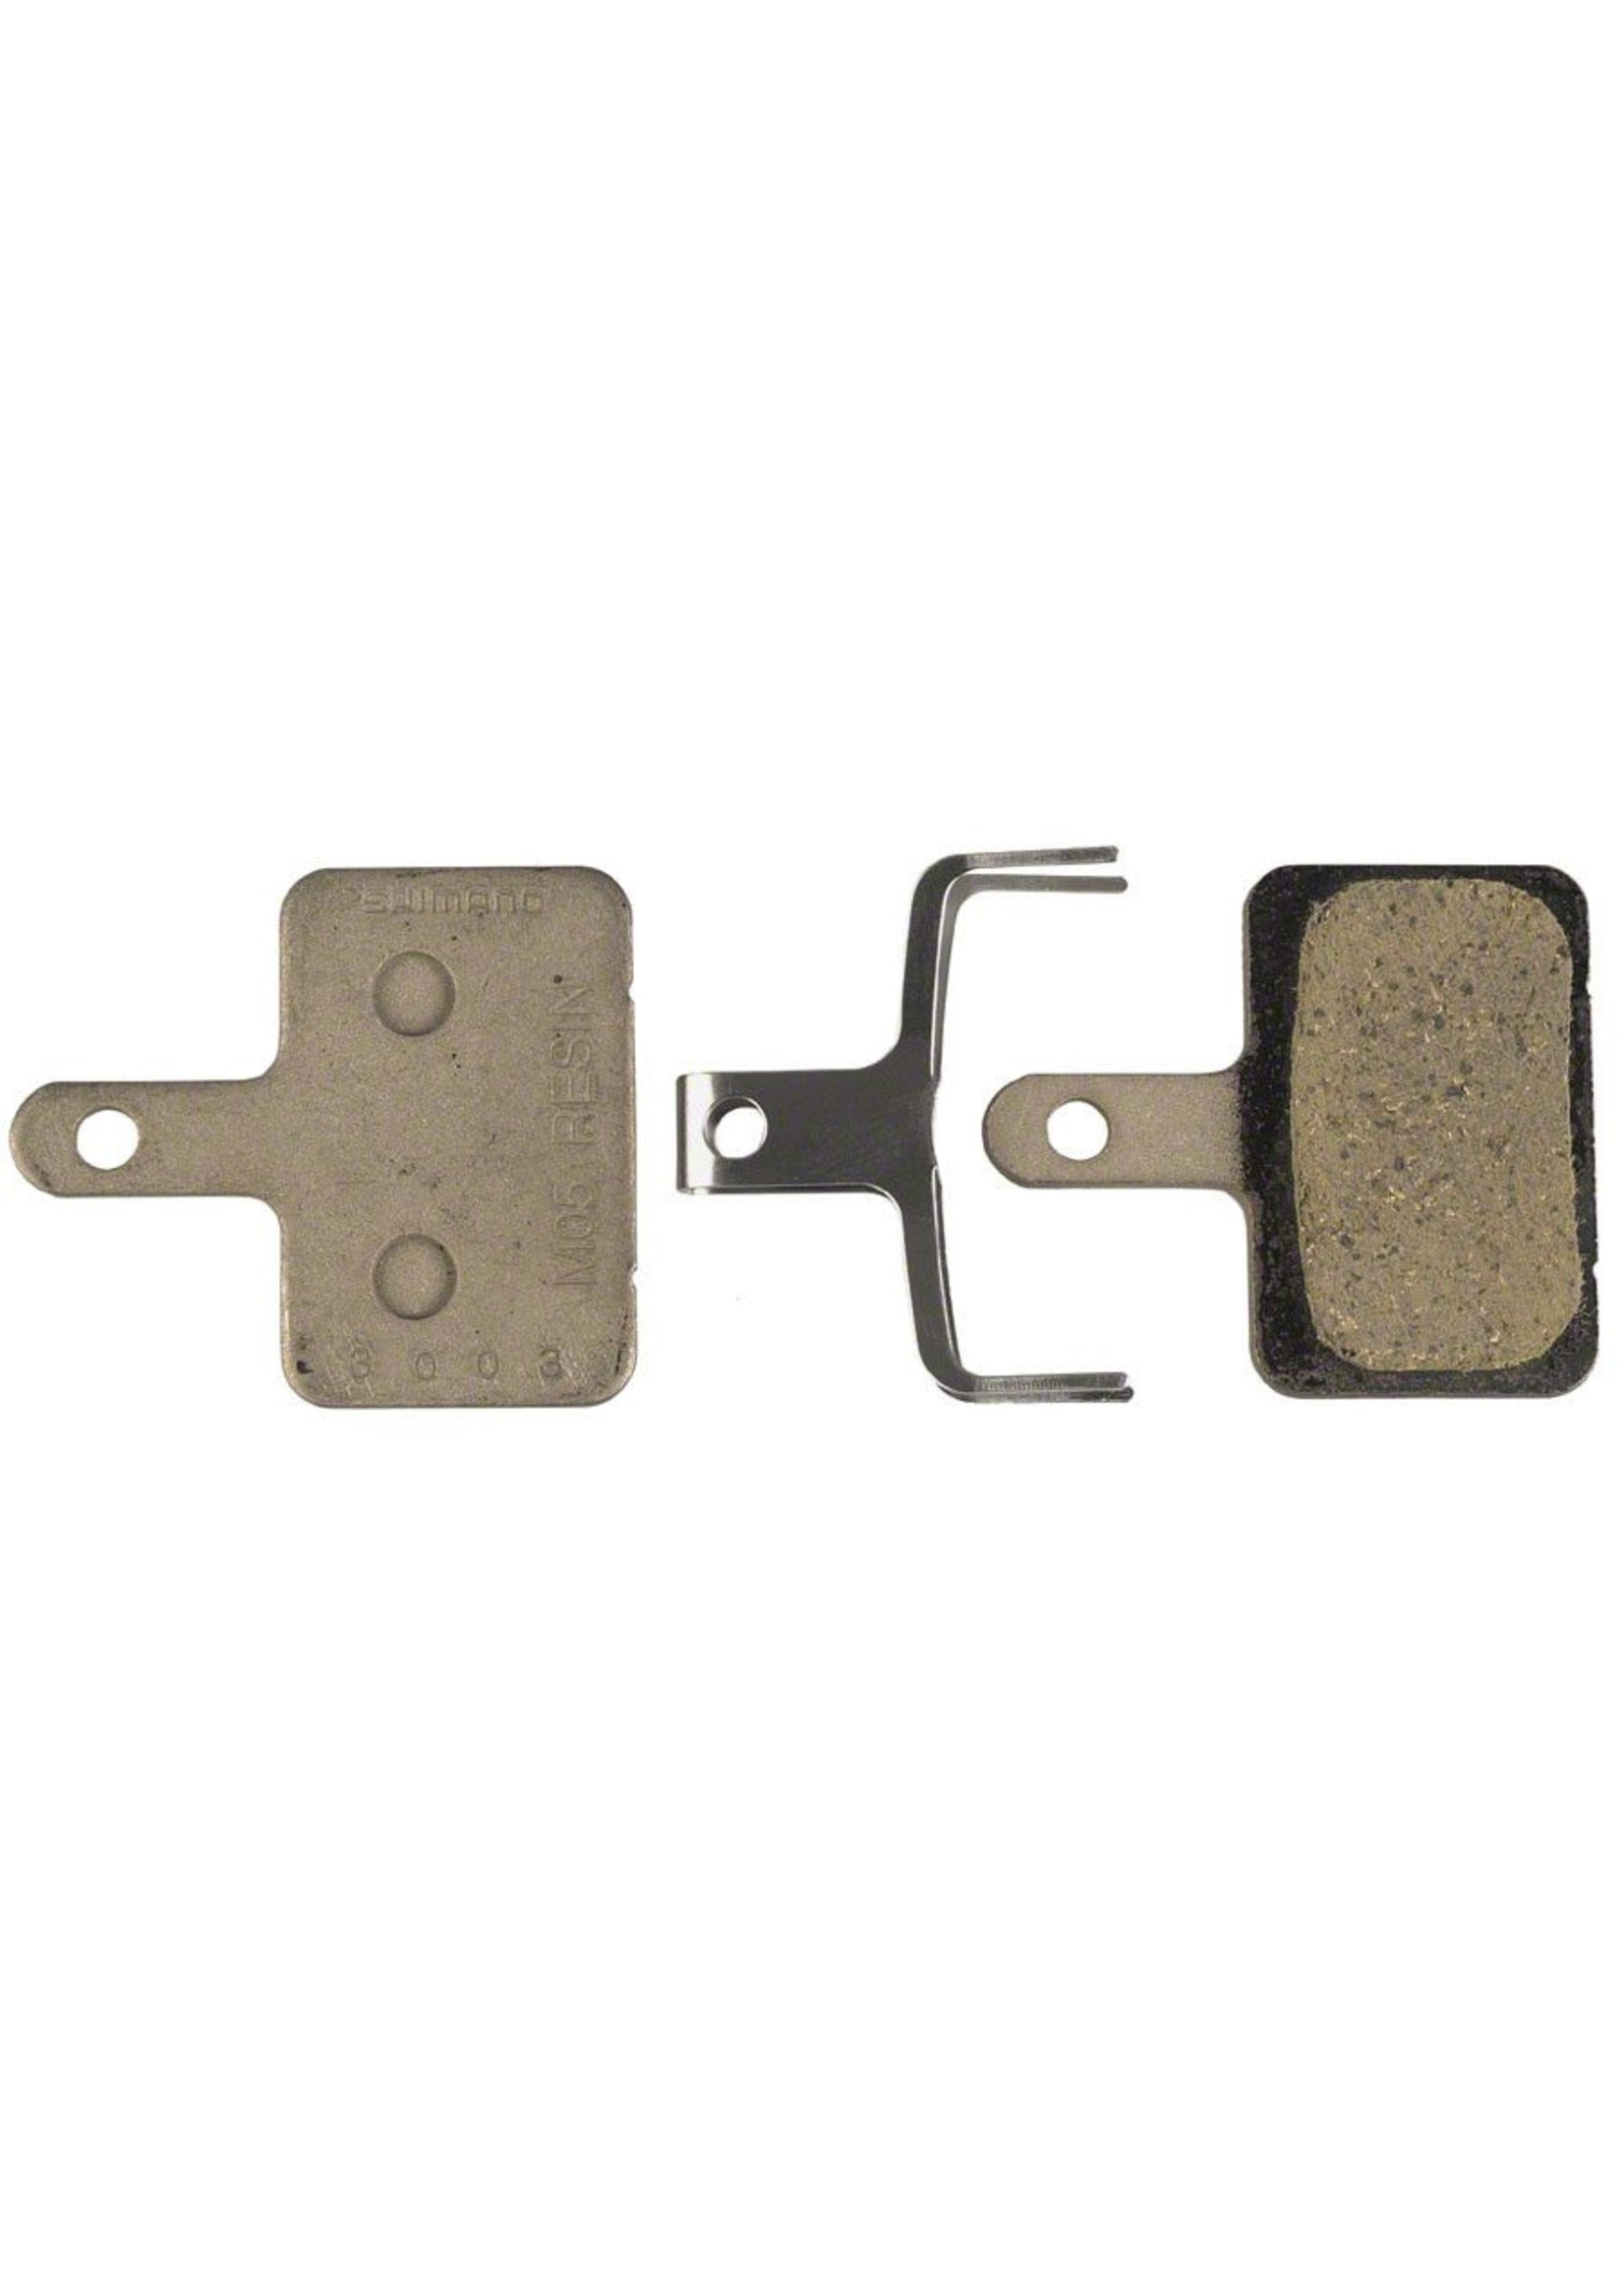 Shimano M05 Resin Disc Brake Pads and Spring for Deore M515, M515LA and Nexave C601 Calipers